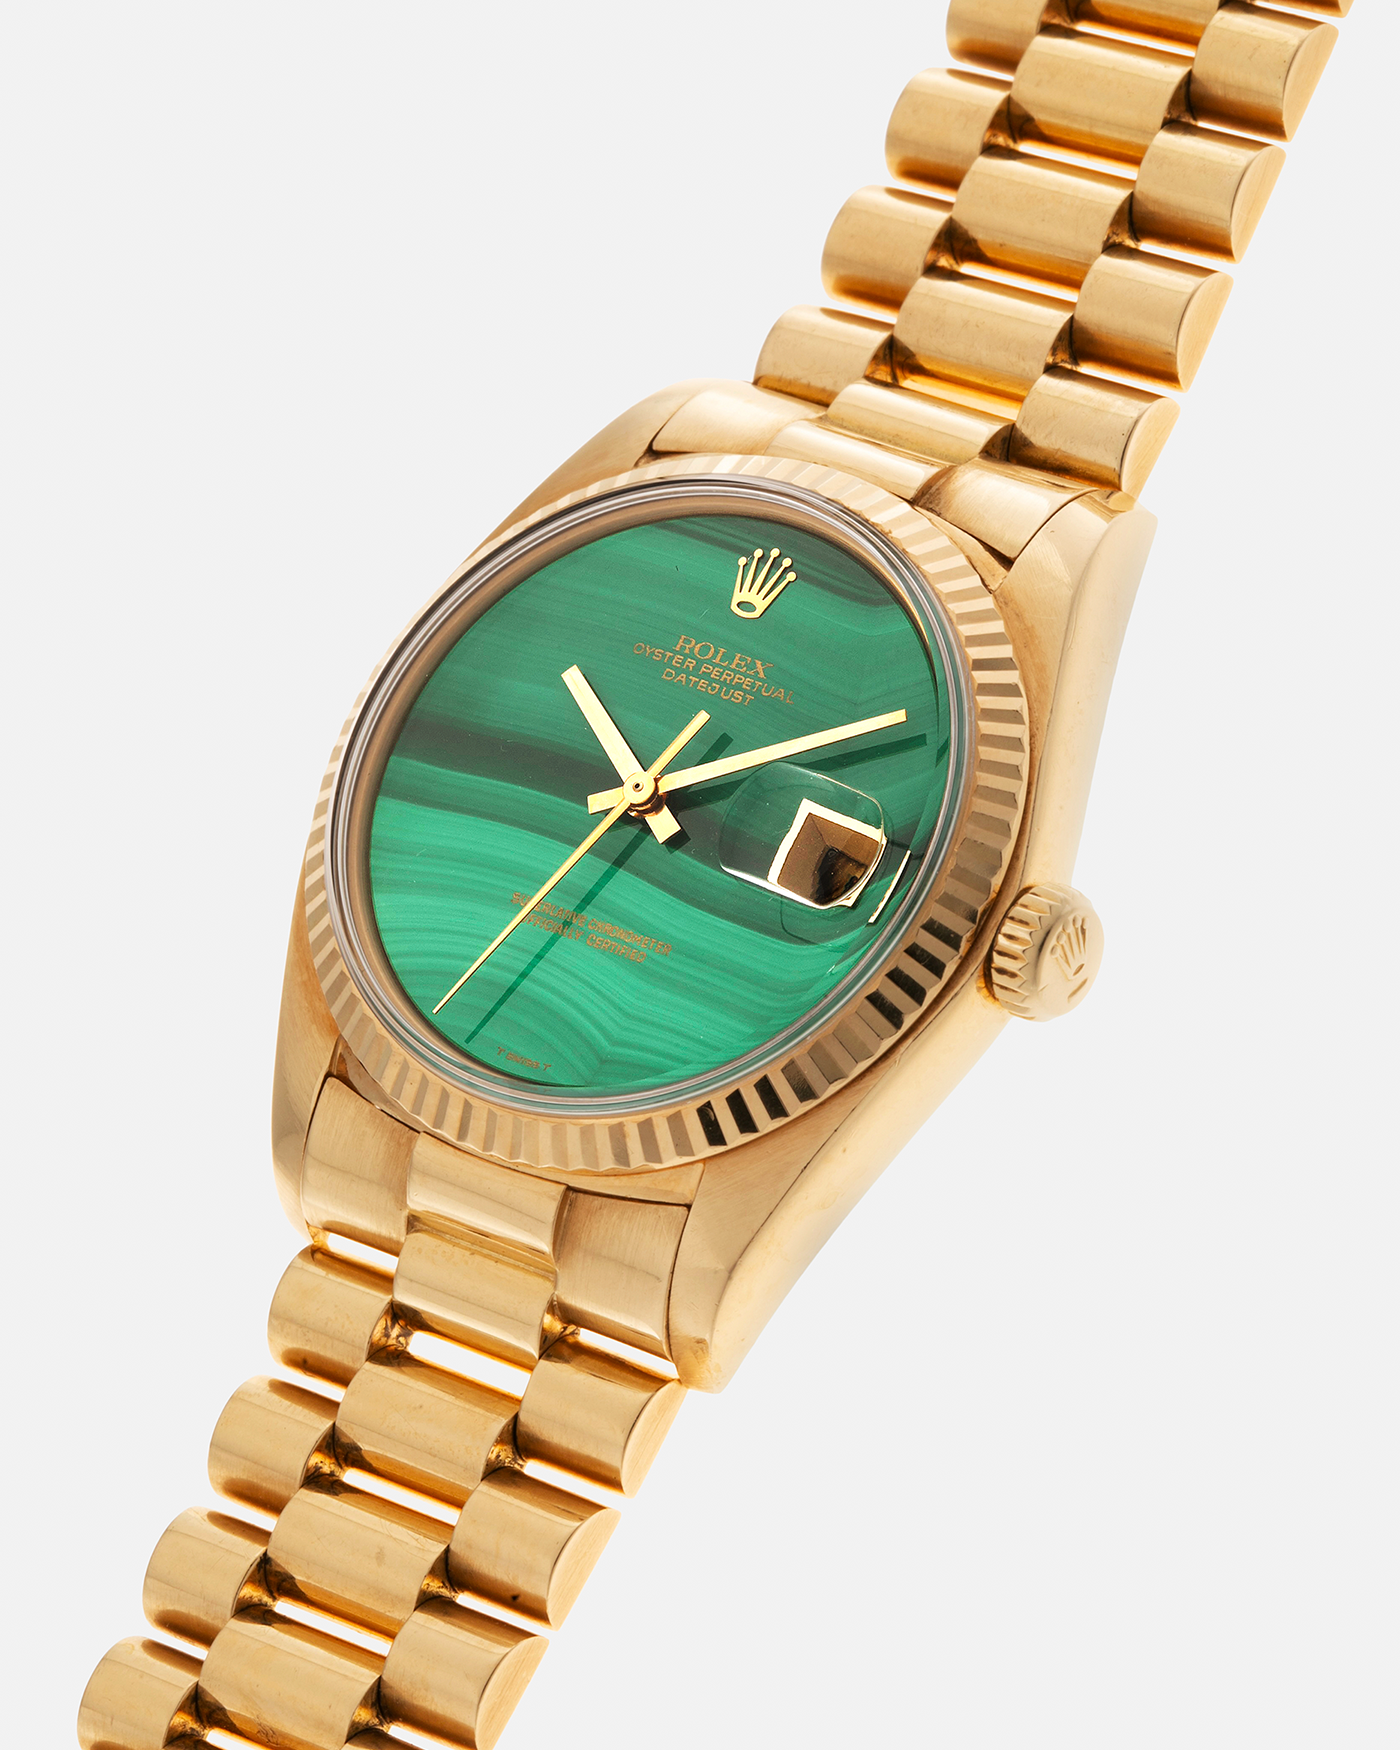 Brand: Rolex Year: 1976 Model: Datejust Reference Number: 1601 Serial Number: 420XXXX Material: 18-carat Yellow Gold, Malachite Stone Dial Movement: Rolex Cal. 1570, Self-Winding Case Diameter: 36mm Lug Width: 20mm Bracelet: Rolex Presidential Bracelet in 18-carat Yellow Gold with Signed Clasp